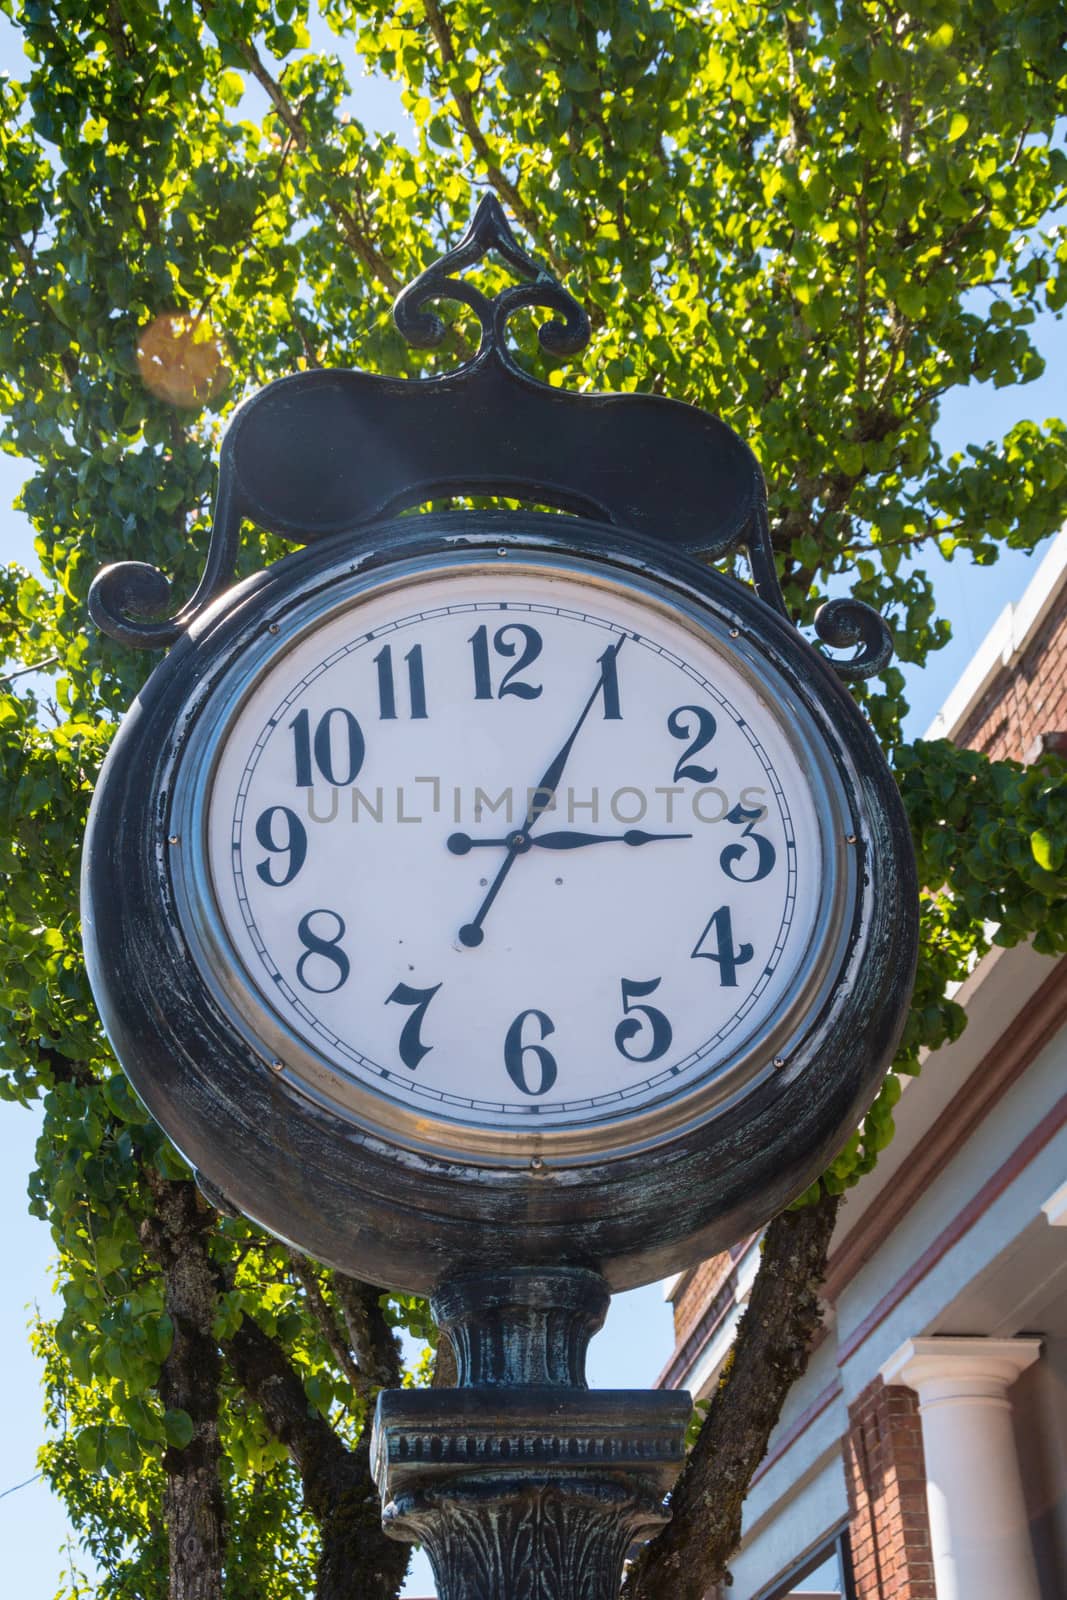 Town clock in front of City Hall in small town, Washington State